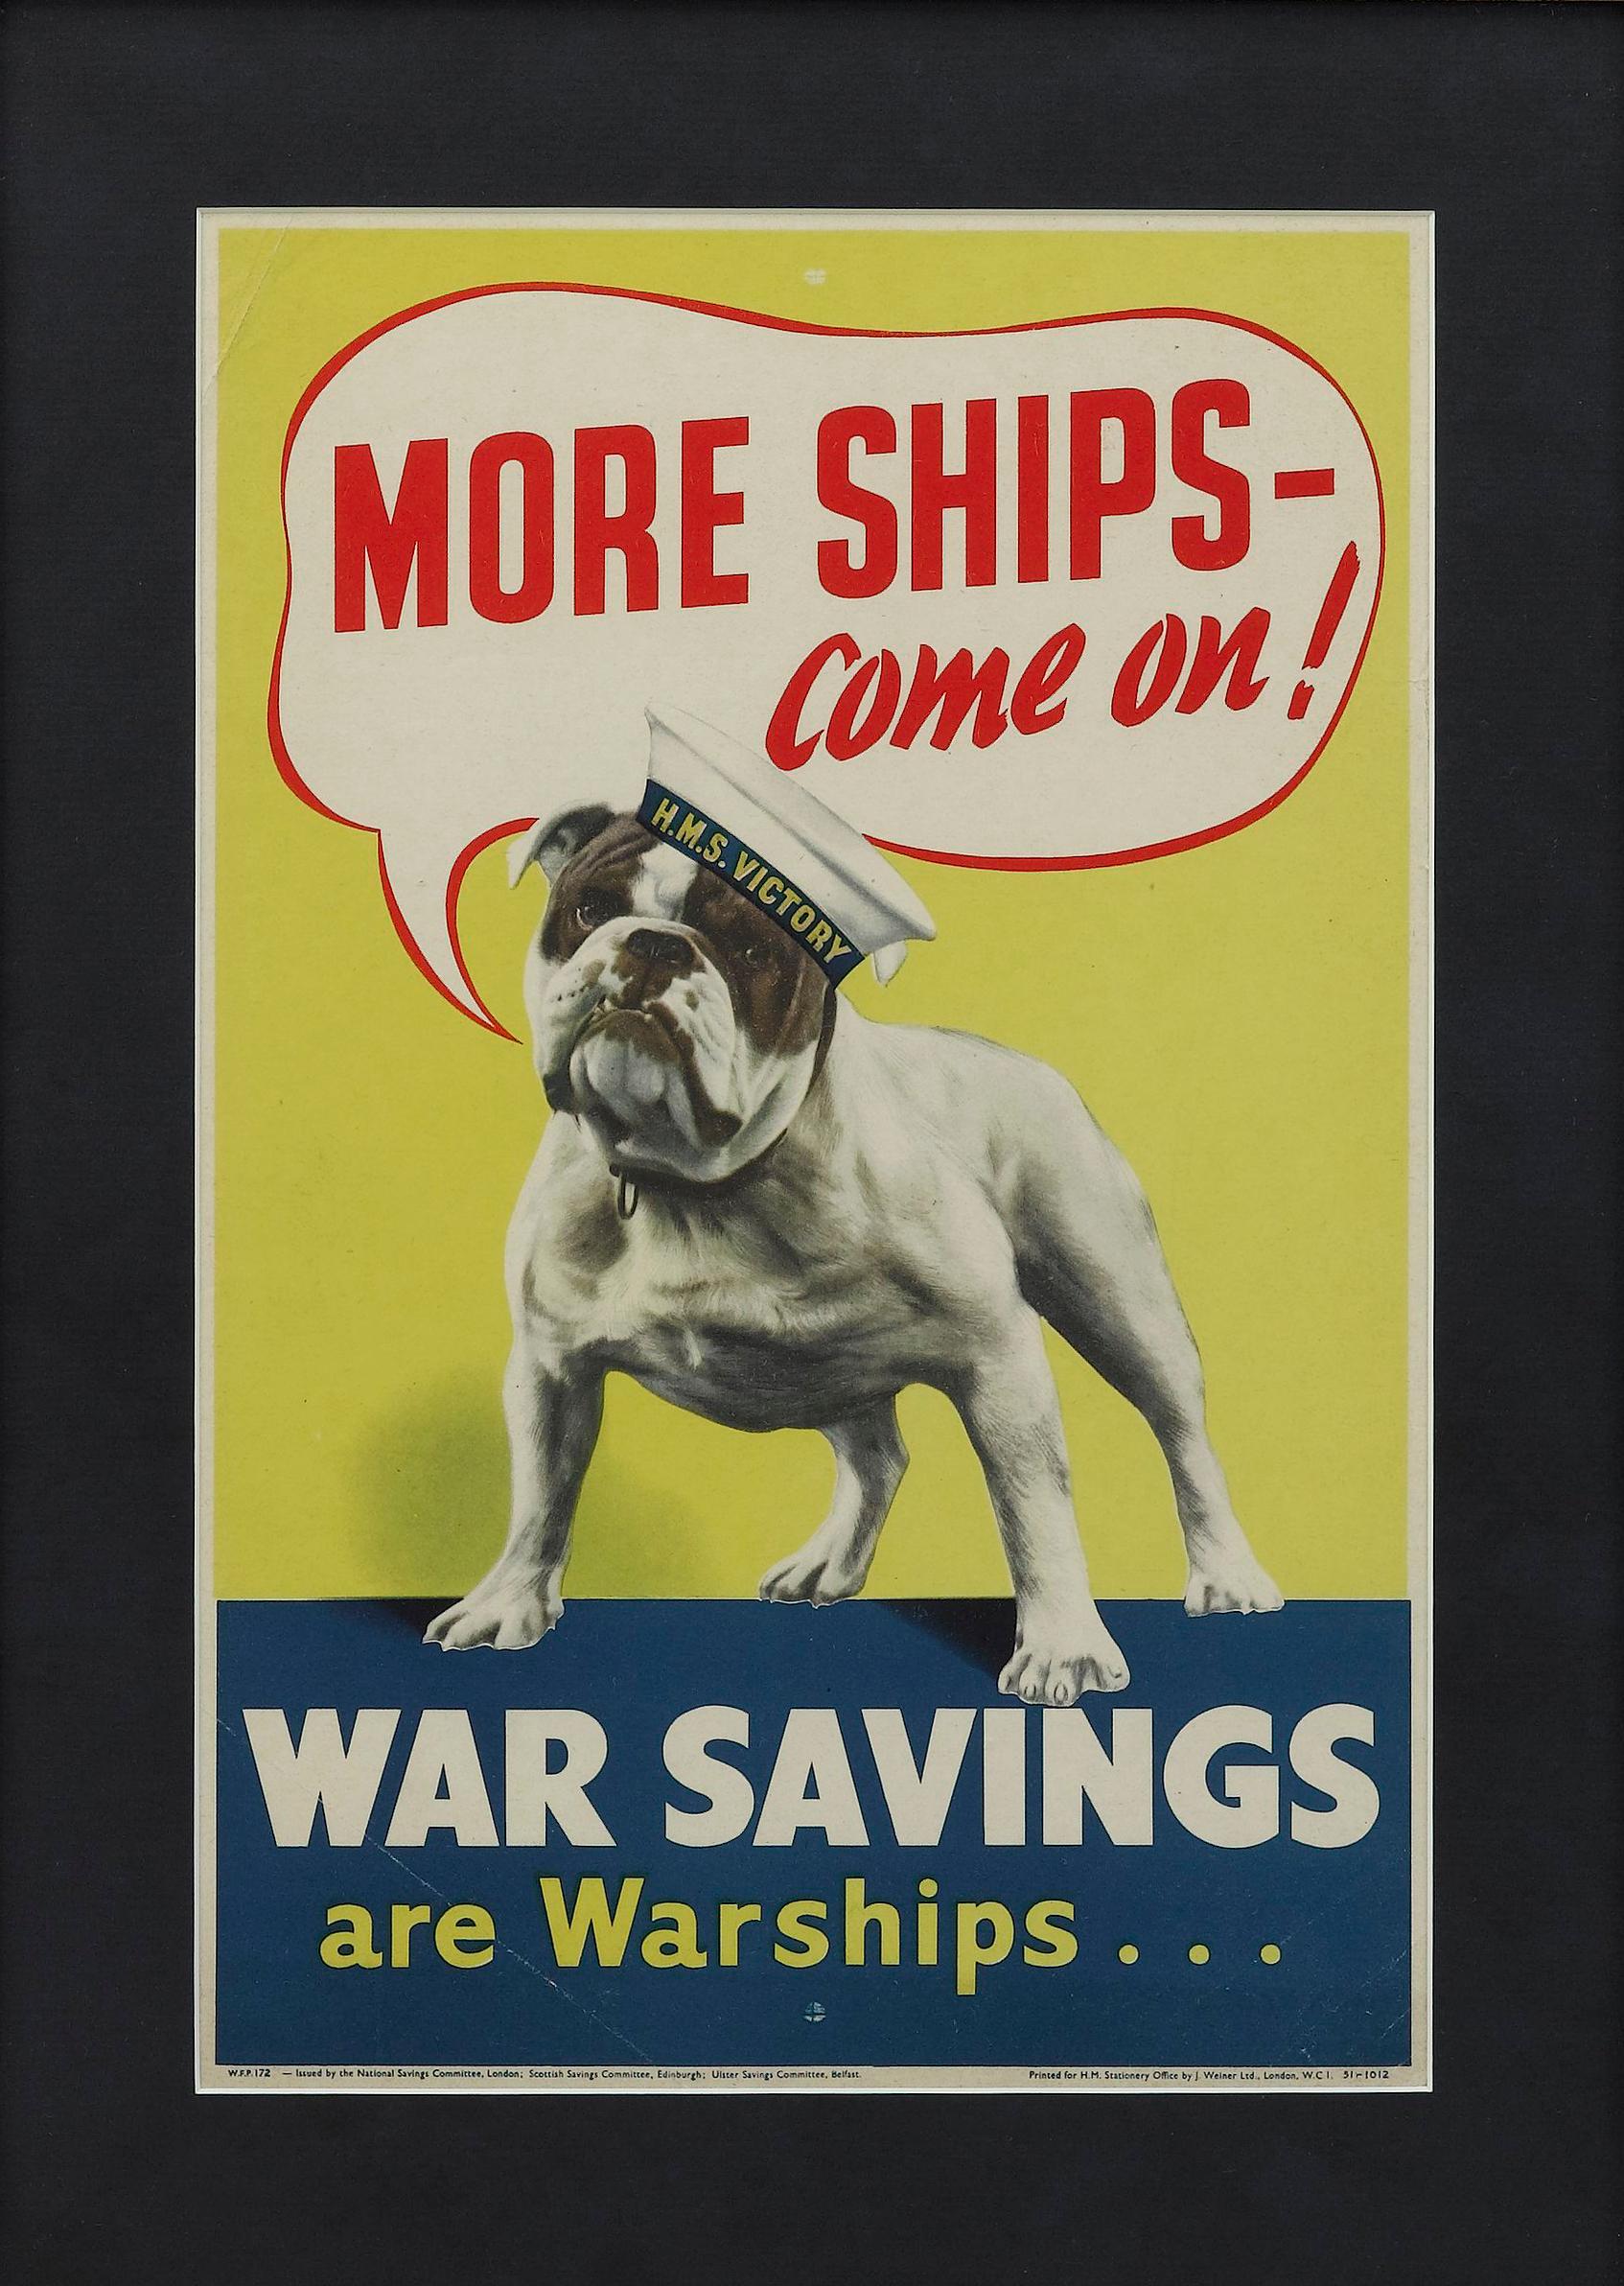 Presented is a vintage WWII British War Savings Poster. This colorful blue and yellow poster features a British bulldog wearing an HMS Victory sailor cap. Set within a red speech bubble above the dog is the text, “More Ships- Come On!,” printed in